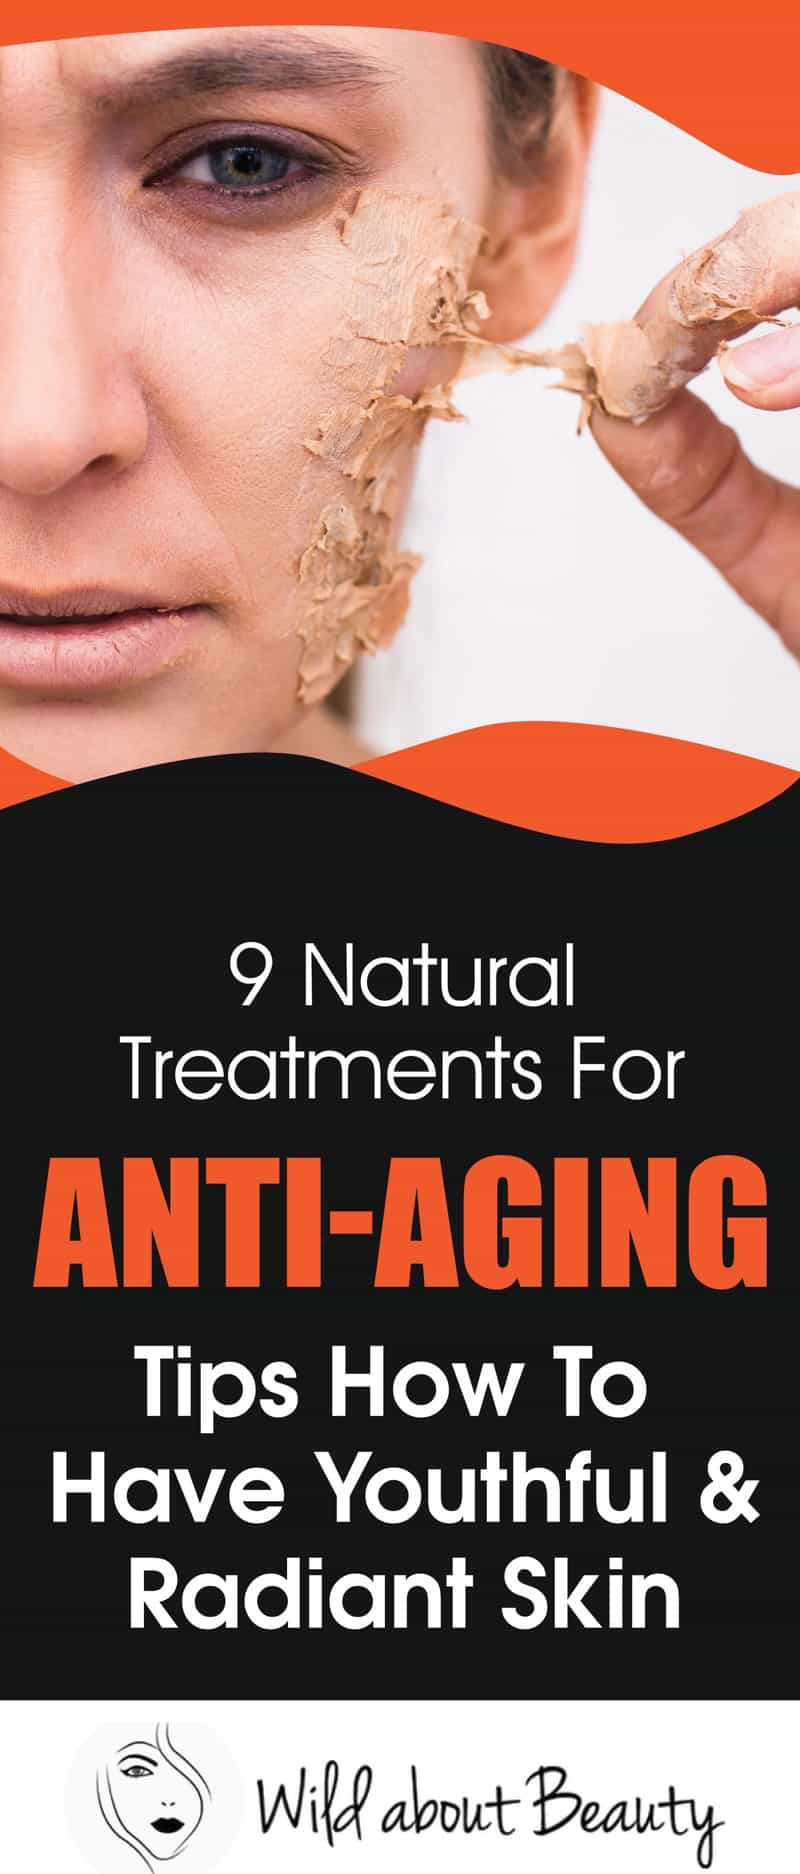 9 Natural Treatments For Anti-Aging